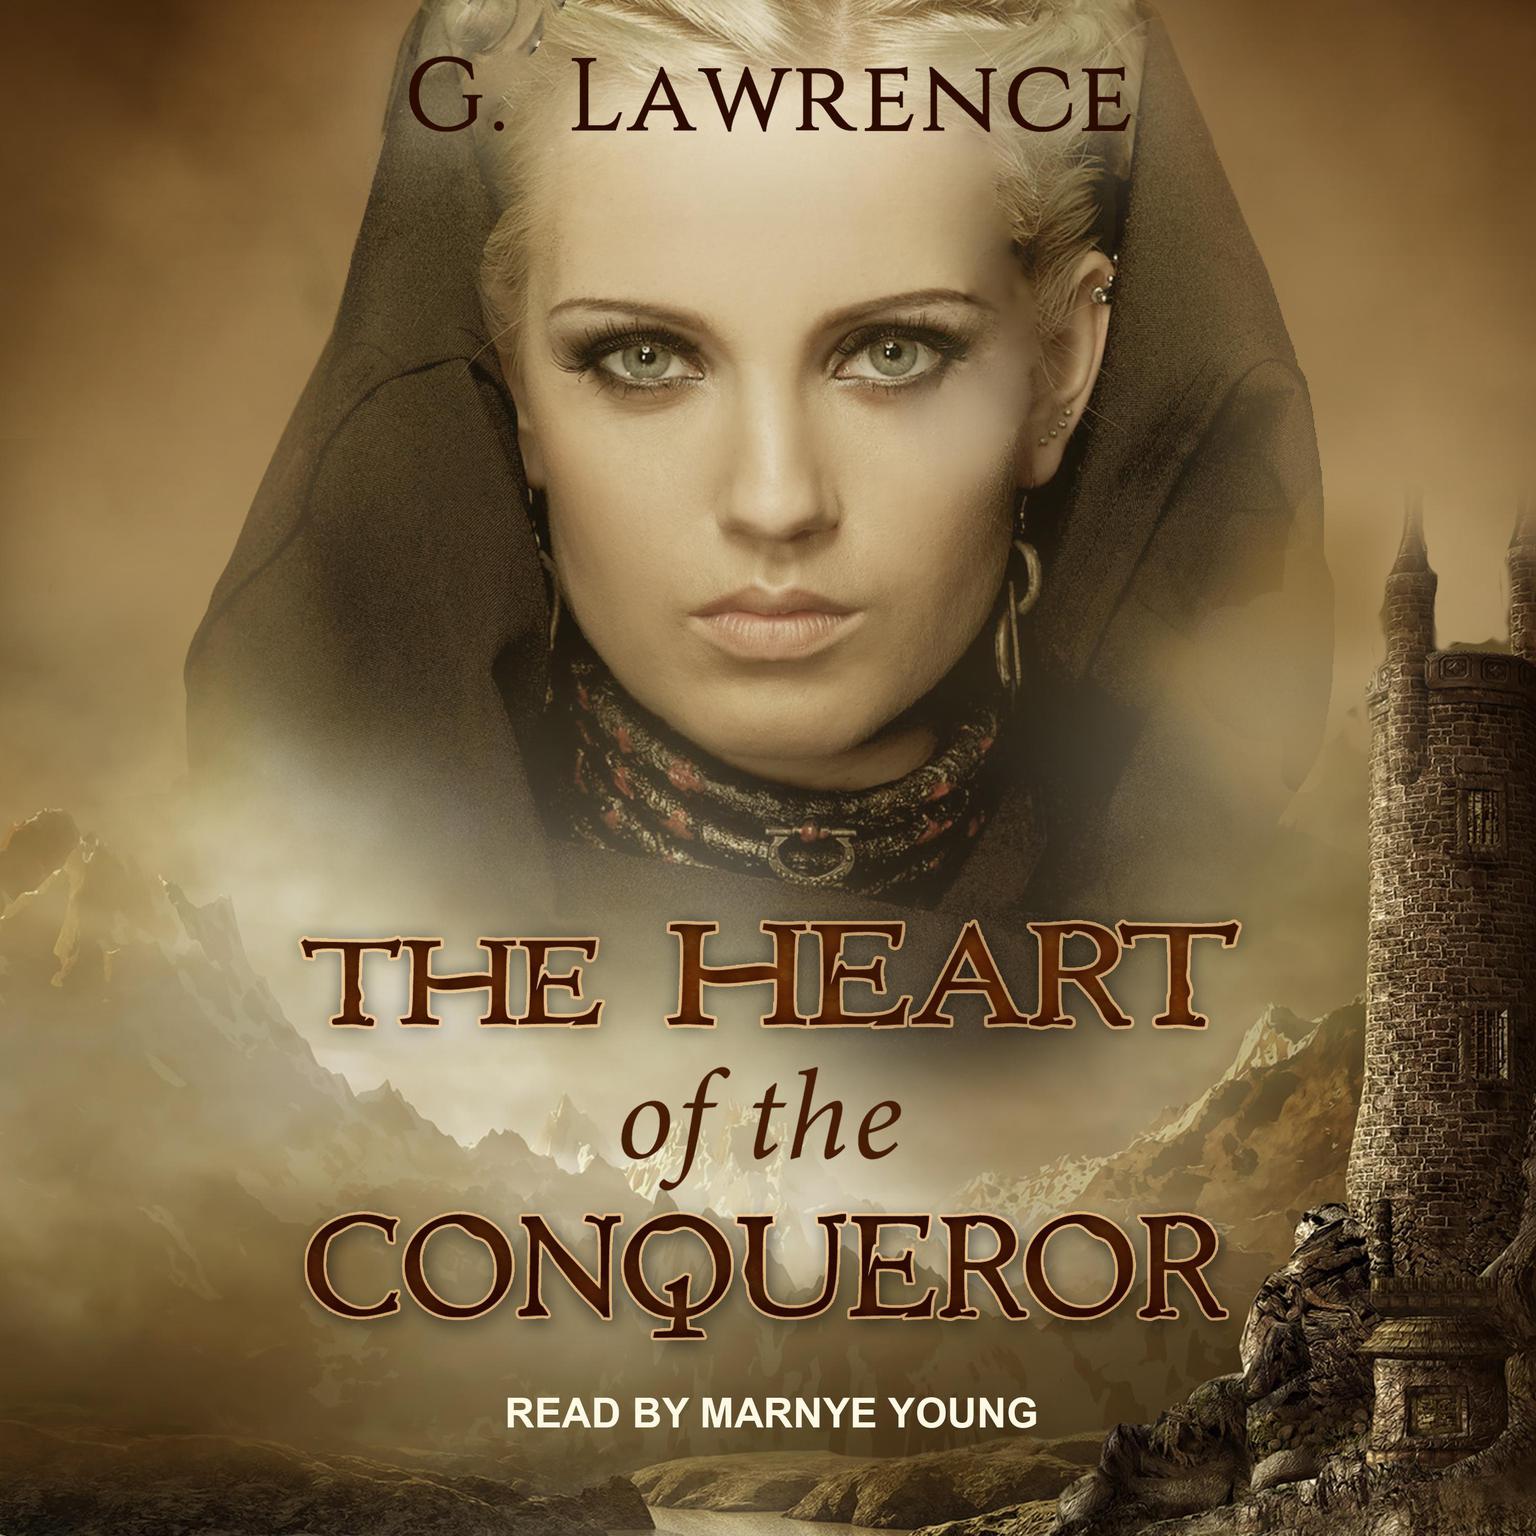 The Heart of the Conqueror Audiobook, by Greg Lawrence